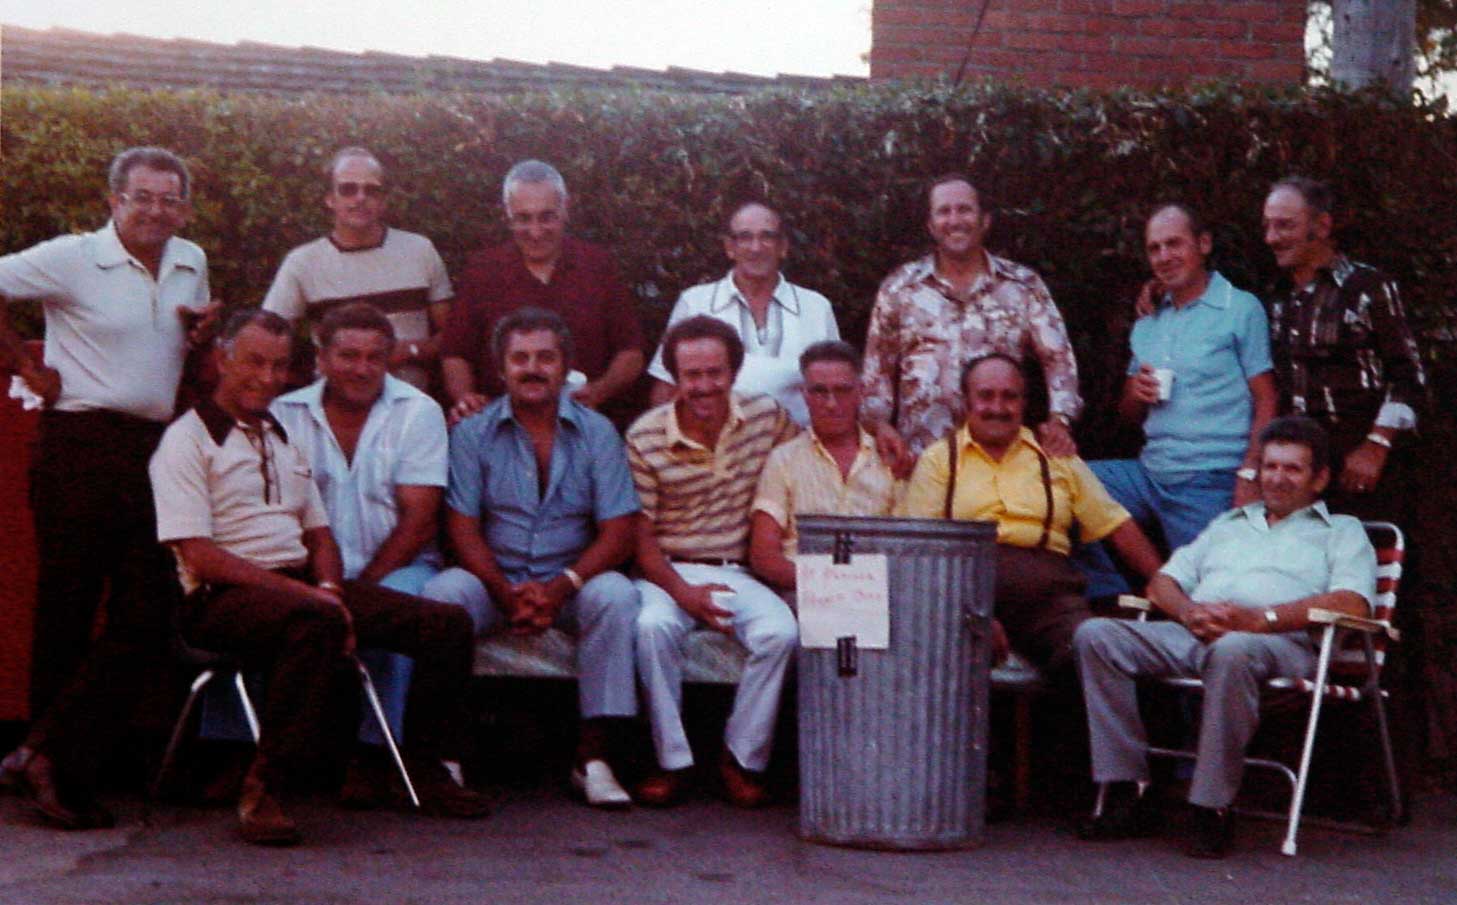 Group photo of Marin County garbage service owners from the 1970s